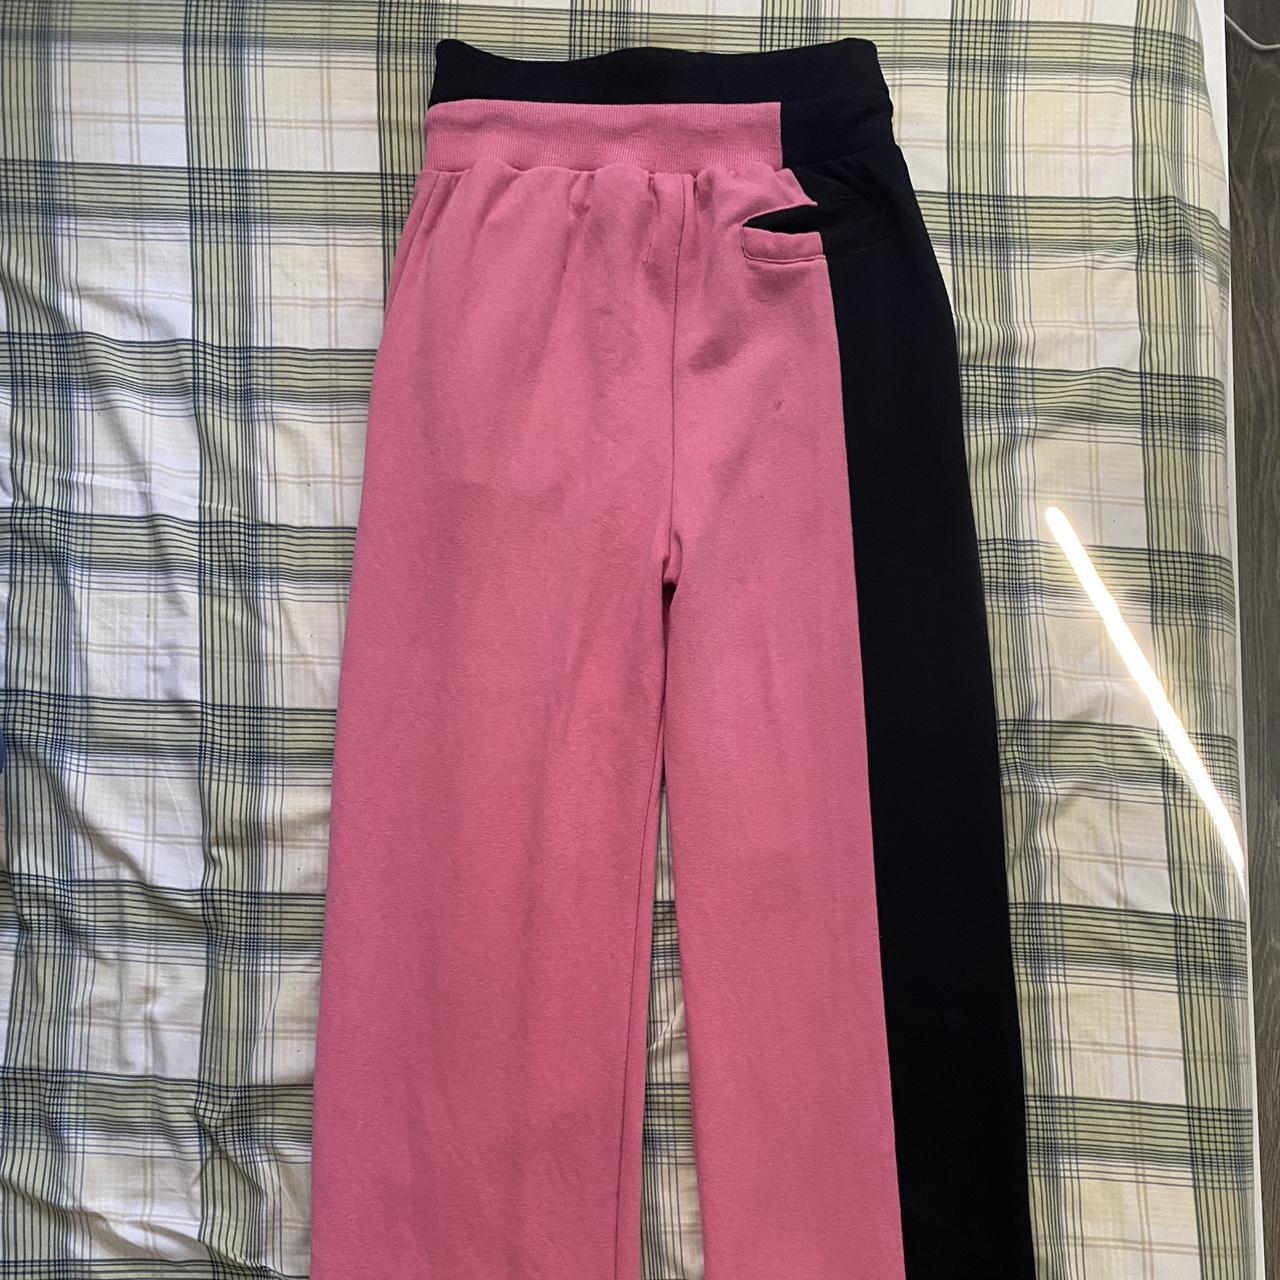 Vetements Men's Pink and Black Joggers-tracksuits (3)